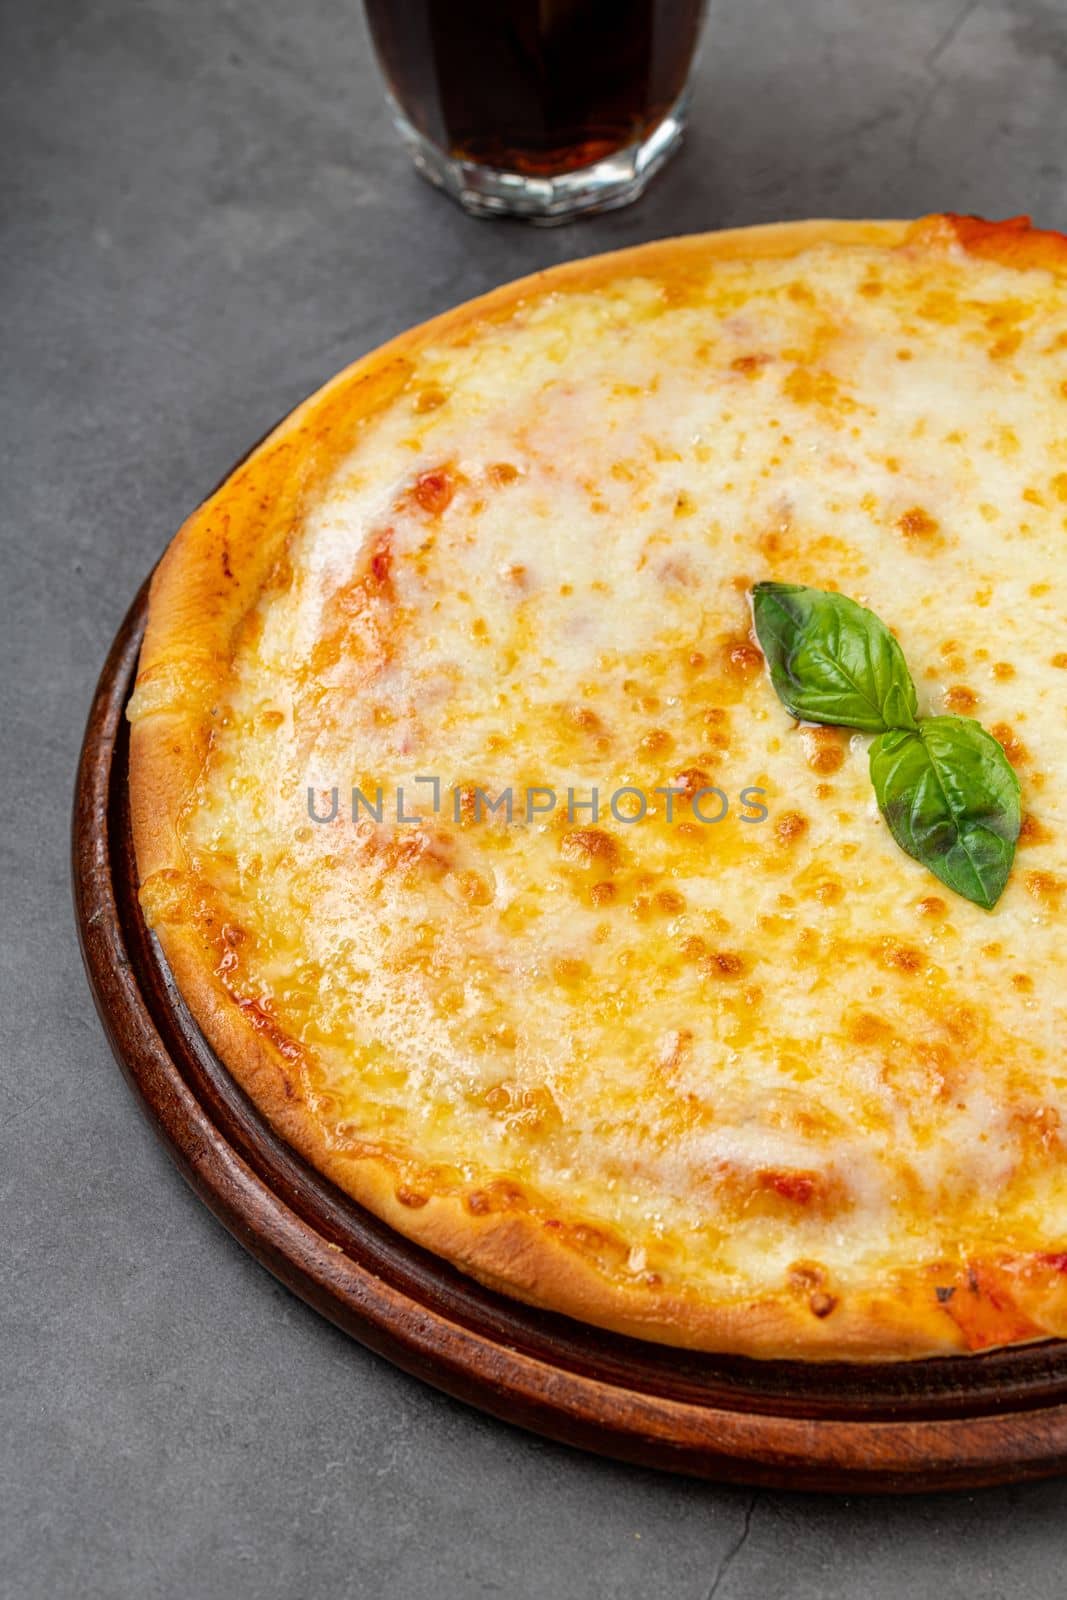 Italian pizza with four cheeses and lots of mozzarella on a cutting board